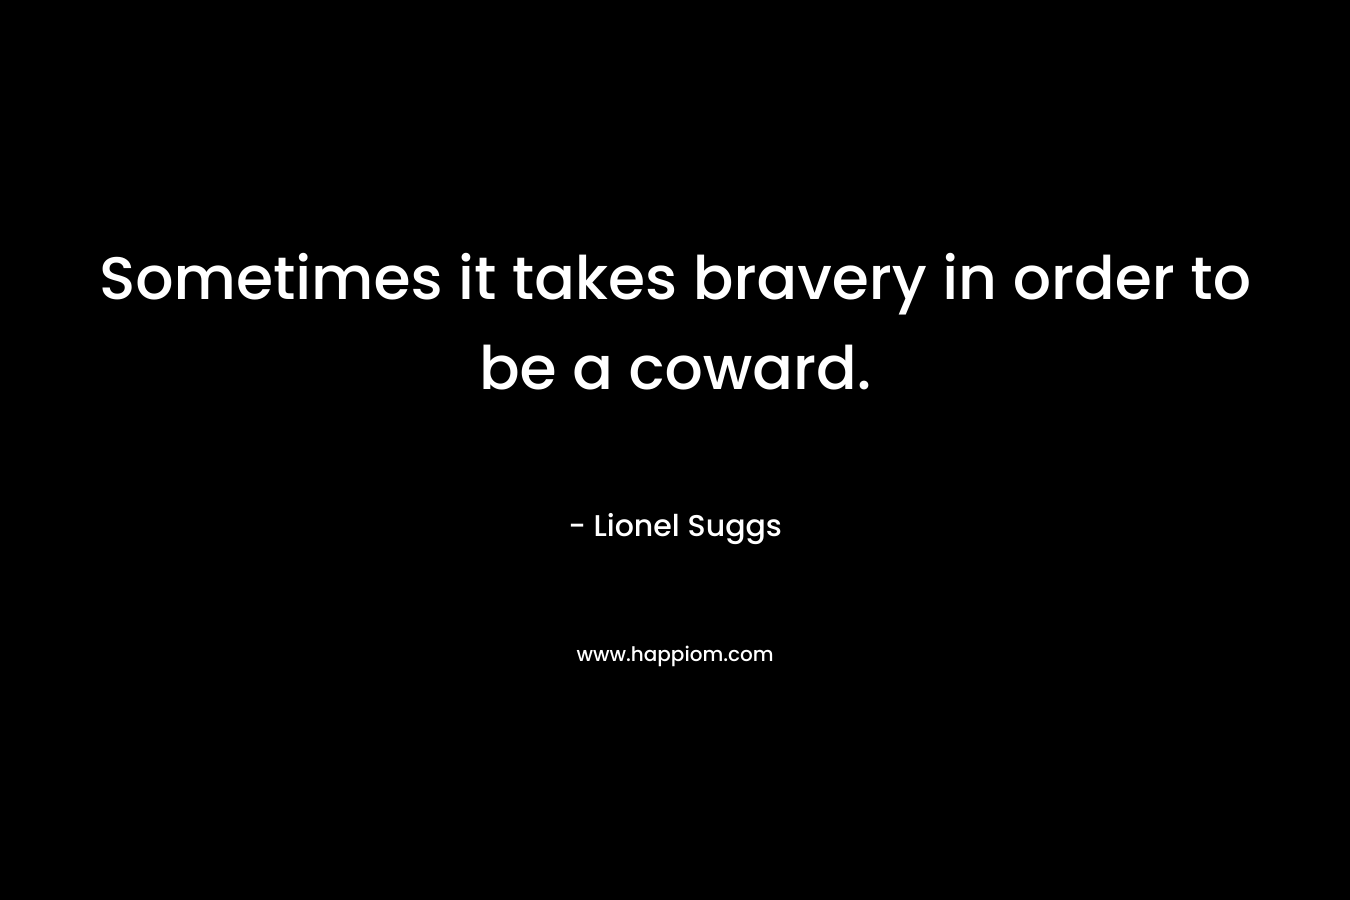 Sometimes it takes bravery in order to be a coward.